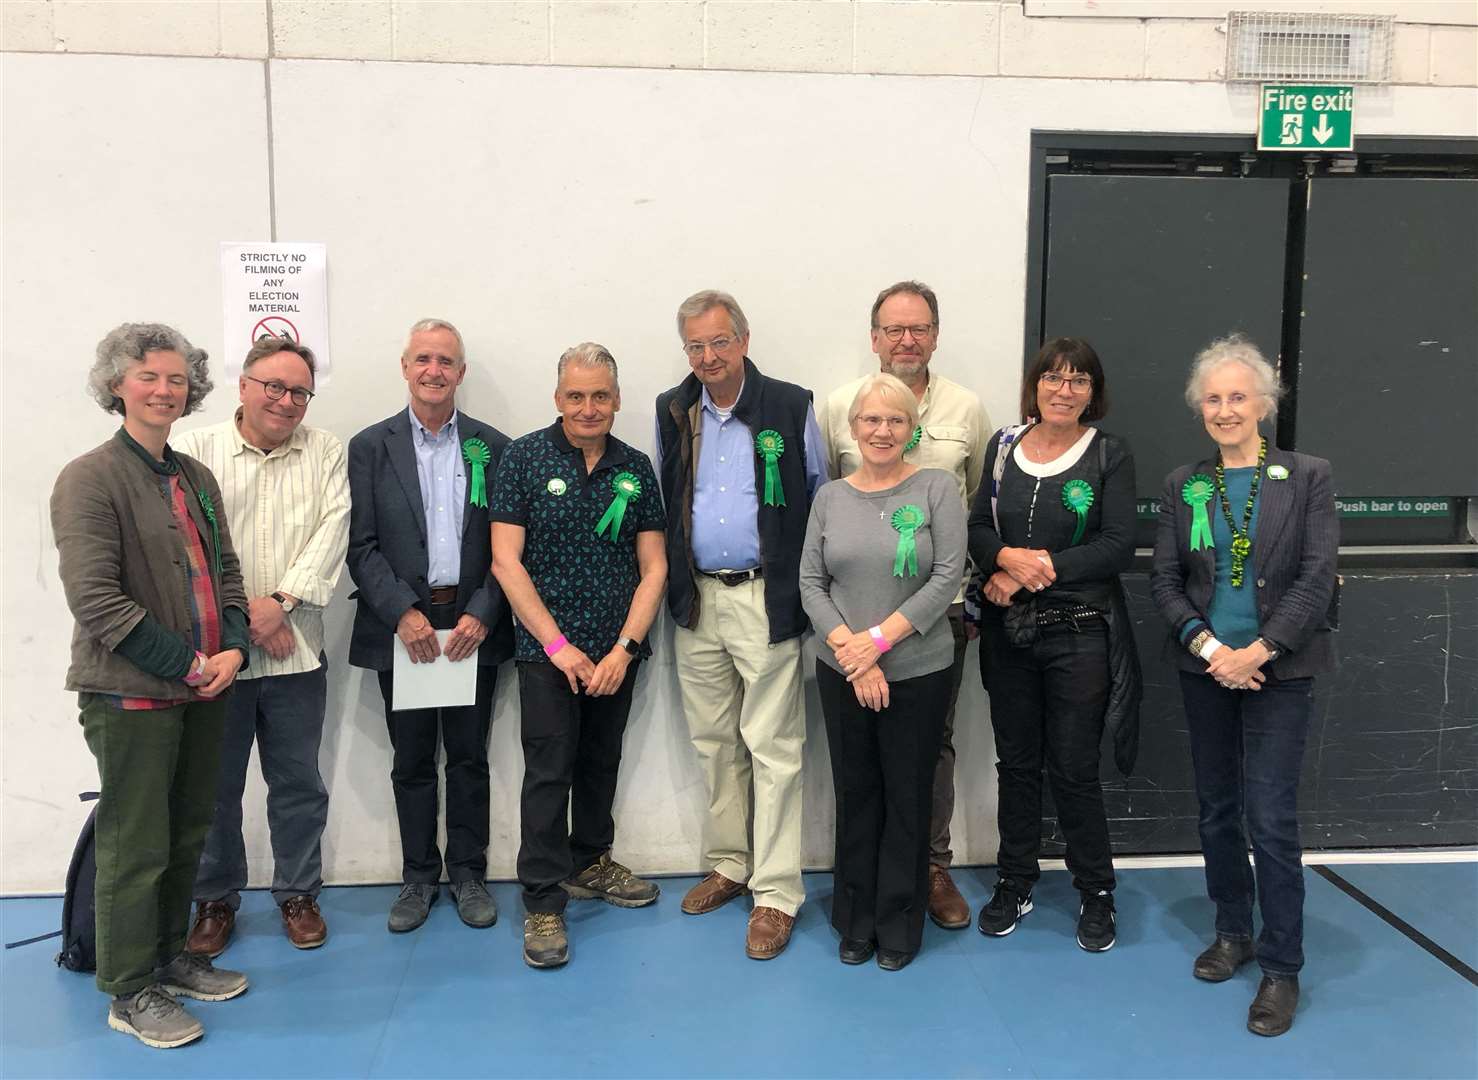 The Green Party won a total of 11 seats - the most in the district